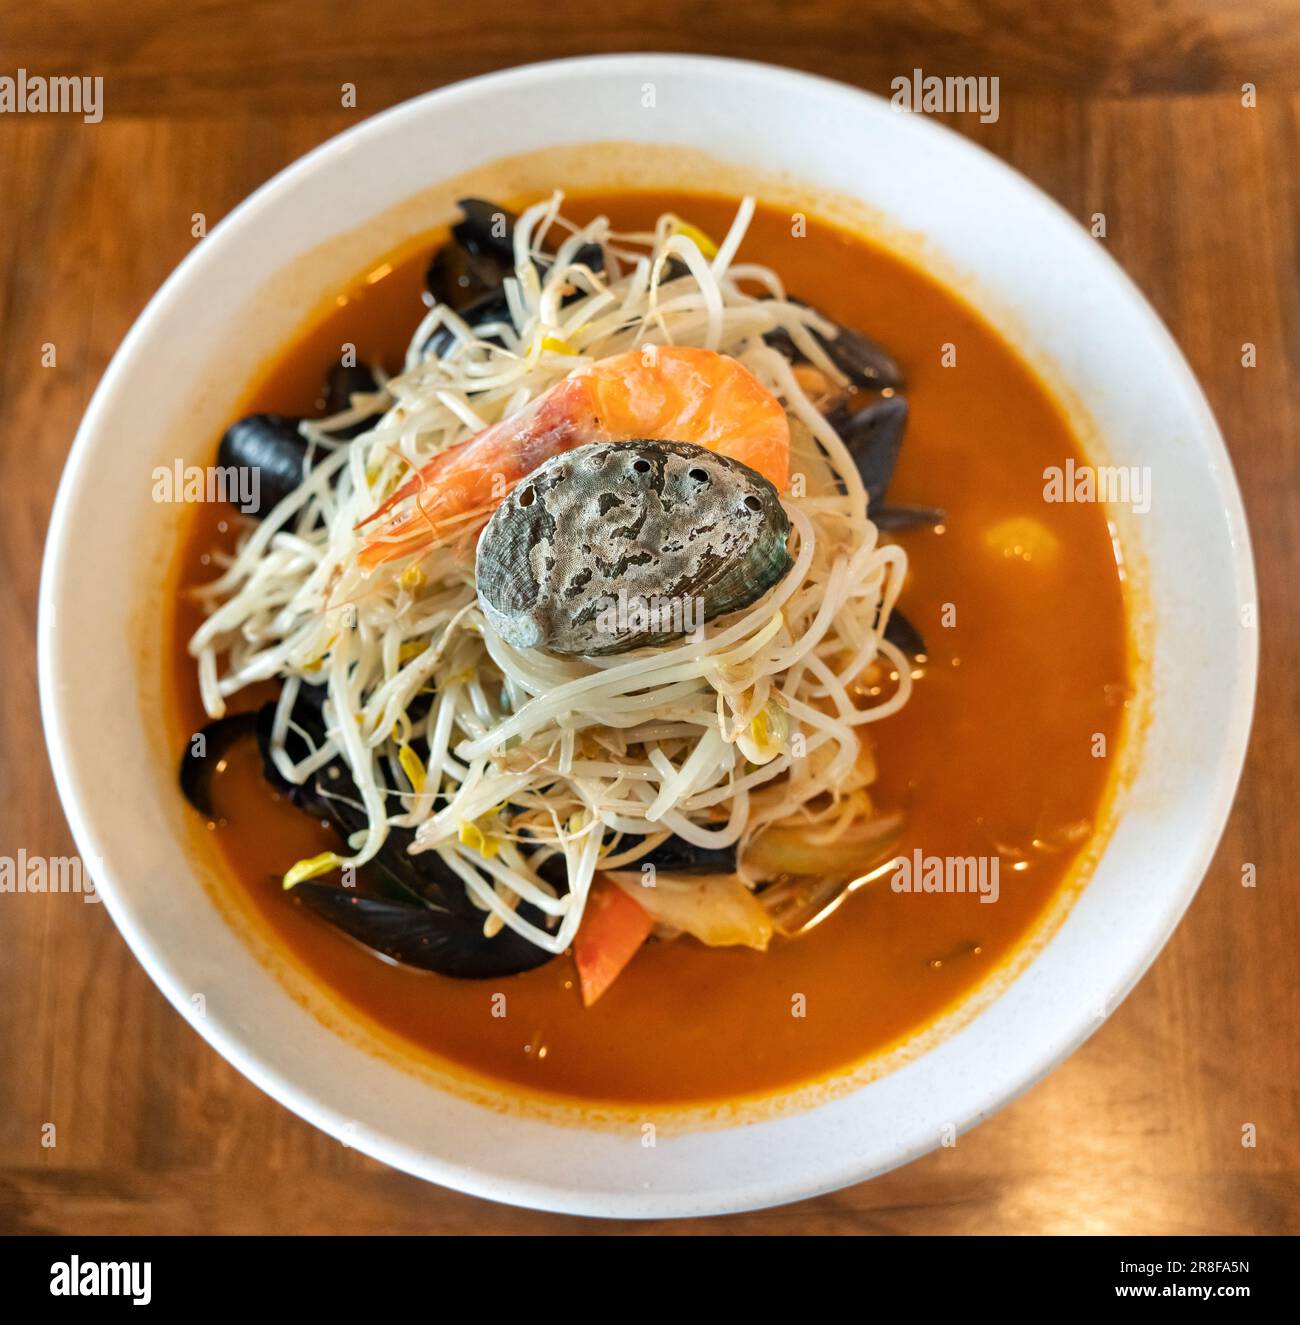 Delicious jjamppong, jjambbong, Chinese-style Korean noodle soup topped with red, spicy seafood and kimchi broth in South Korea. Stock Photo